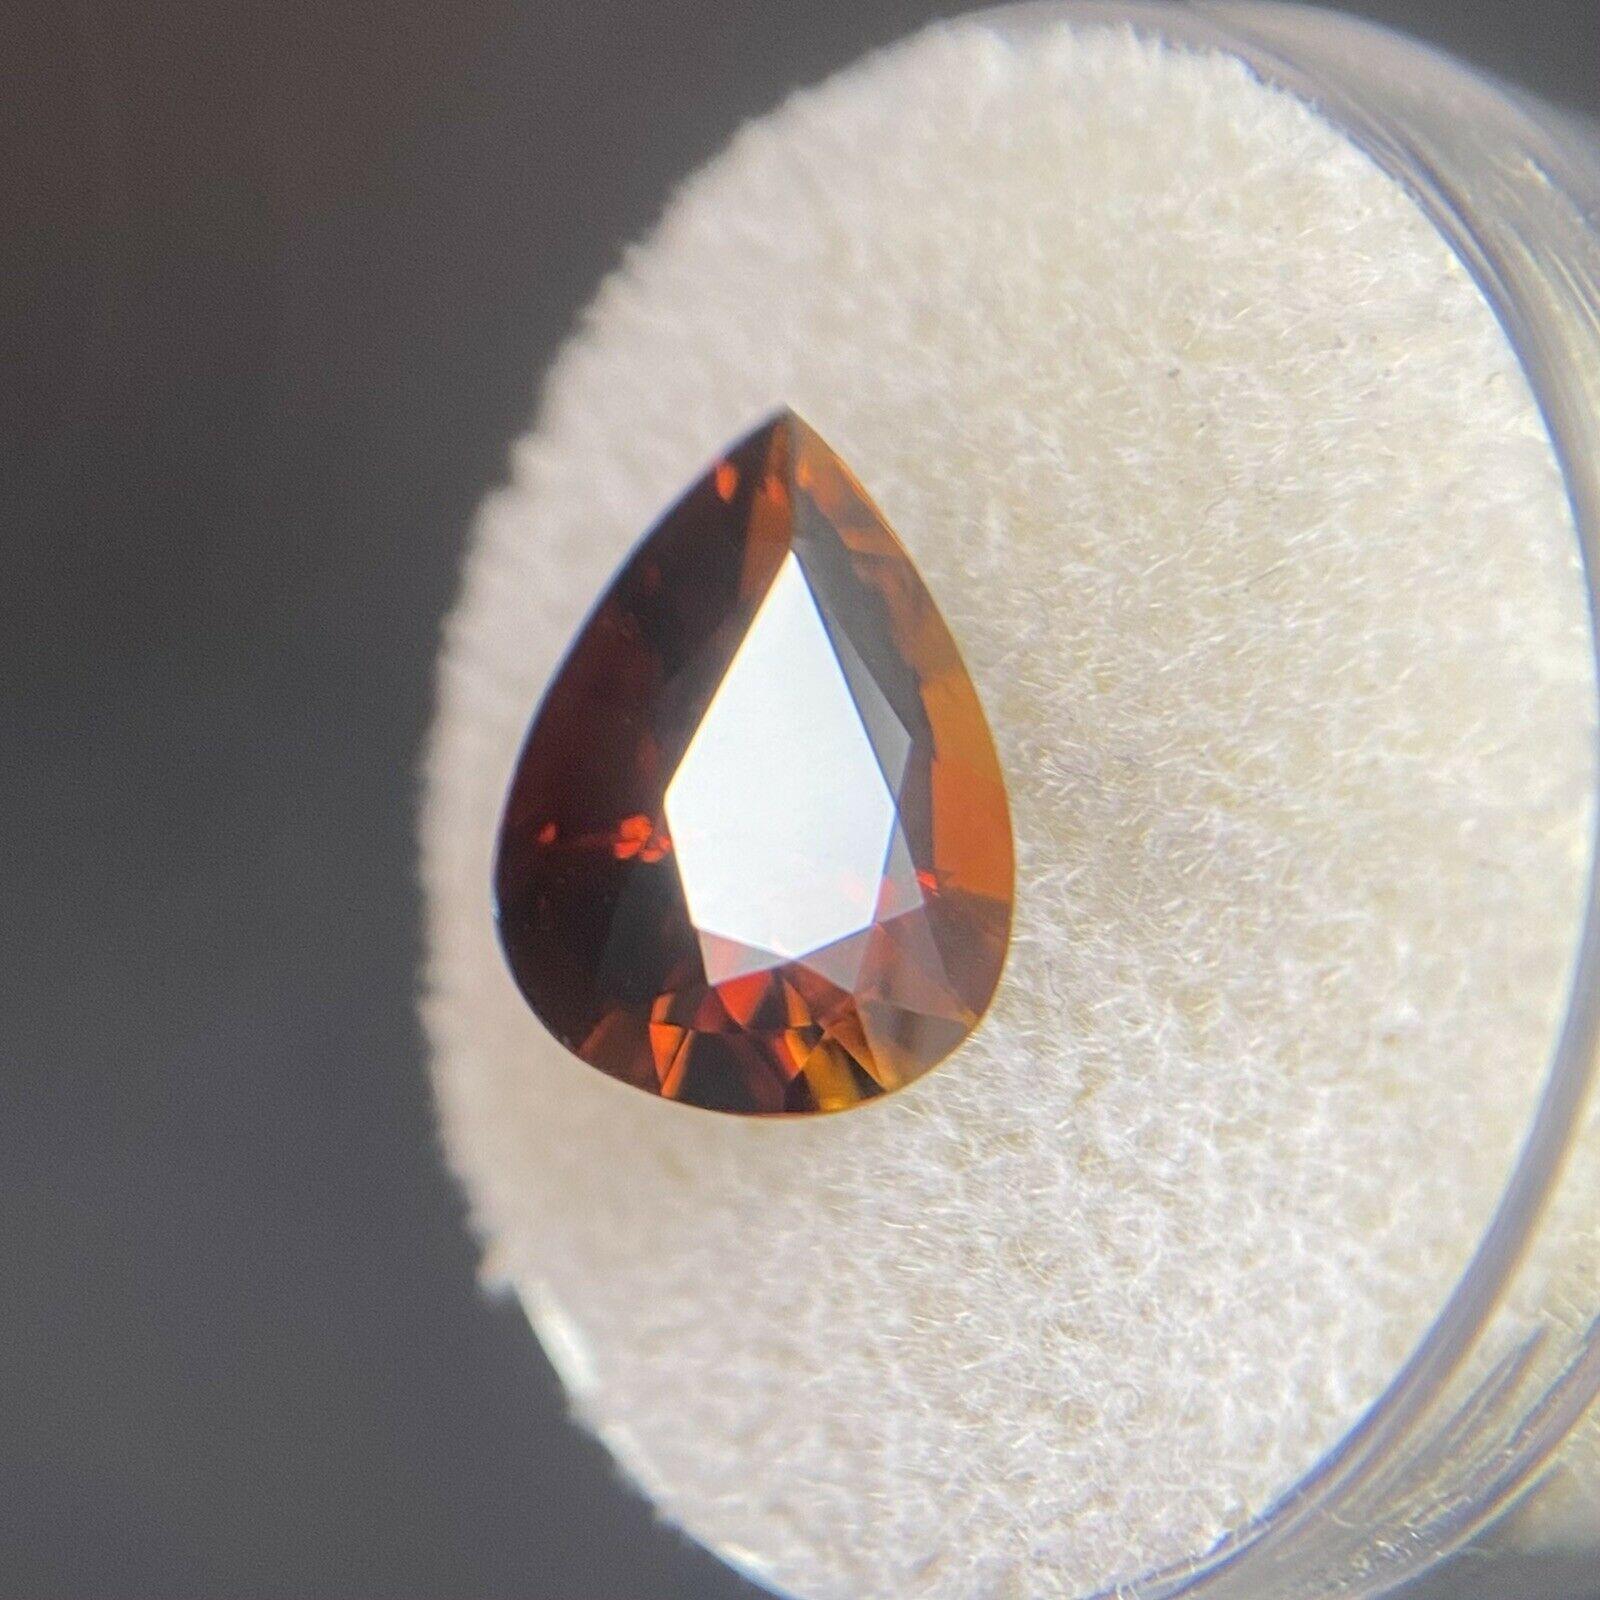 3.64ct Deep Orange Tourmaline Pear Cut Loose Gemstone 12.5 x 9mm

Deep Orange Tourmaline Gemstone. 
3.64 carat stone with a beautiful deep reddish orange colour and very good clarity. Some small natural inclusions visible when looking closely but